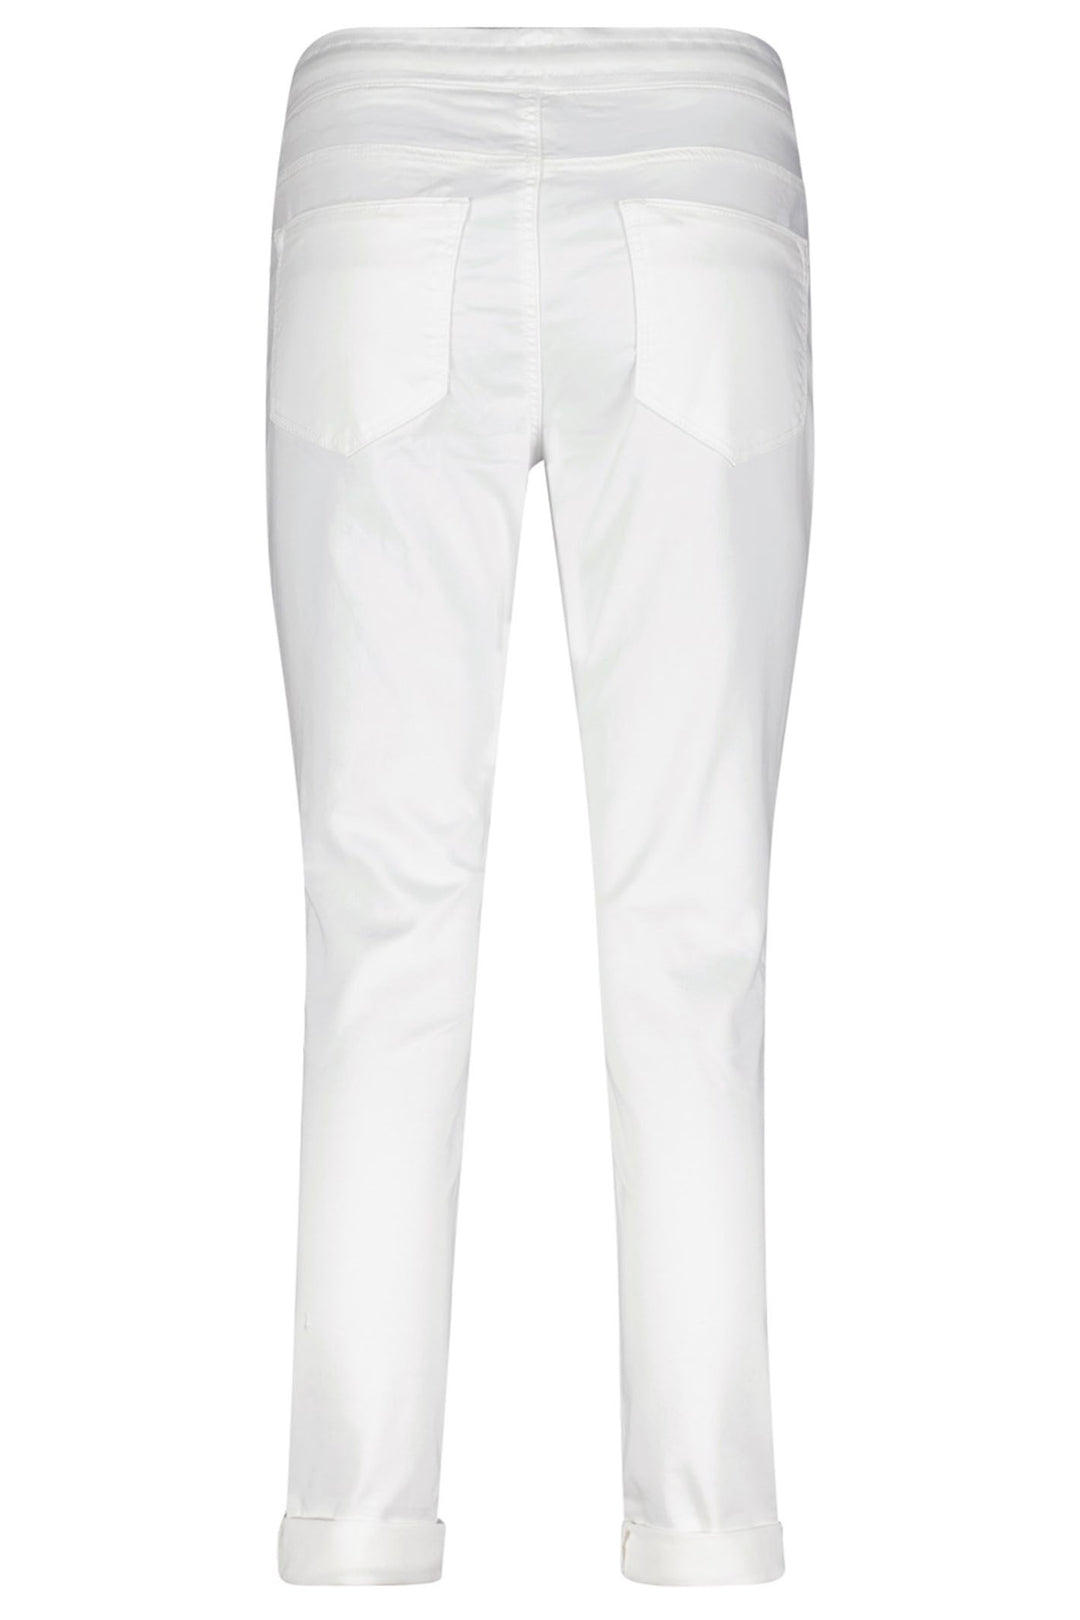 Red Button SRB2957 Tessy White Cropped Jogger Trousers - Dotique